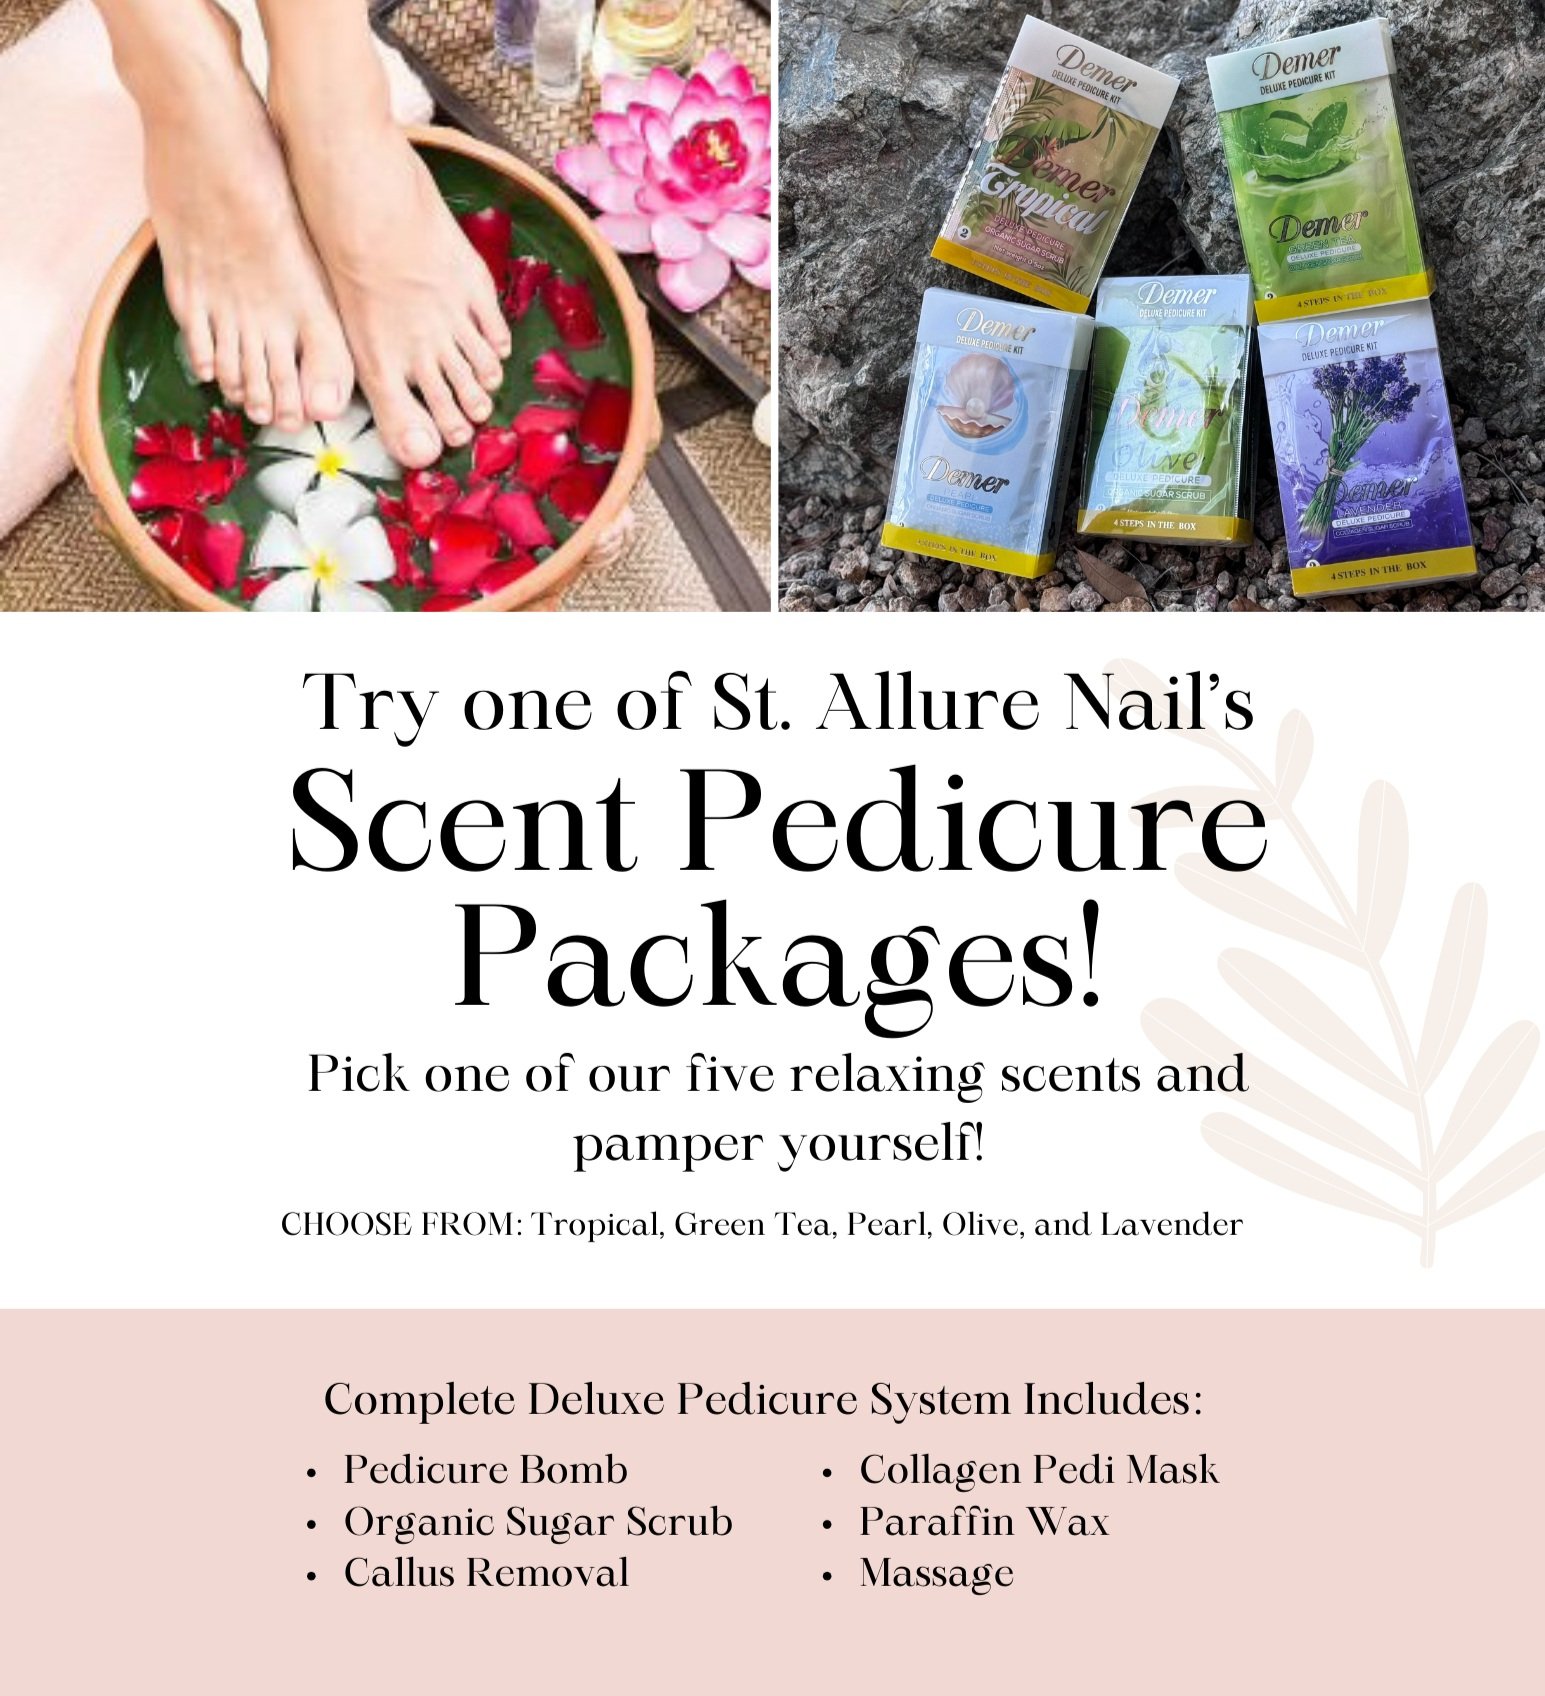 Allure Nail’s Scent Pedicure Package